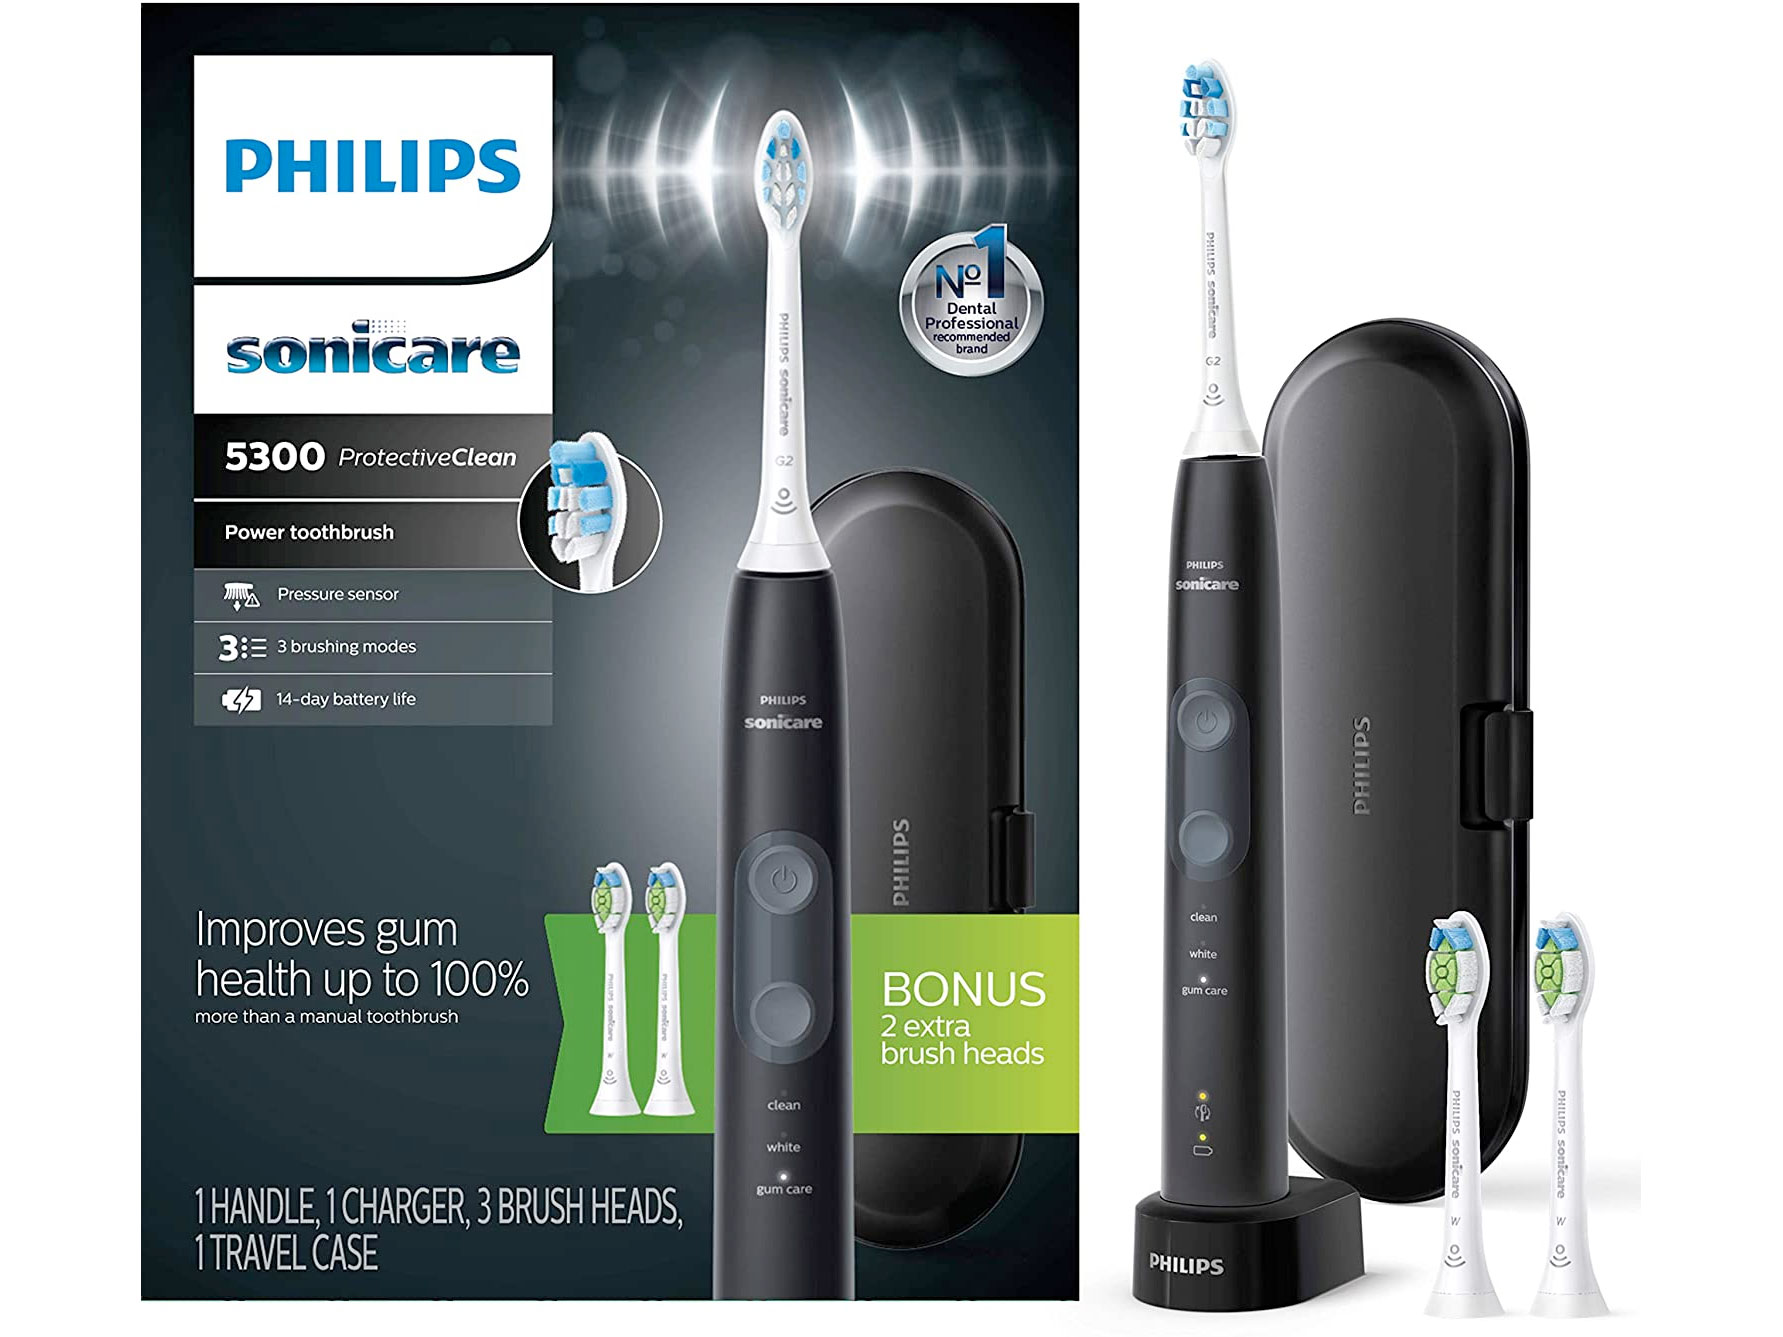 Amazon：Philips Sonicare ProtectiveClean 5300電動牙刷只賣$89.95